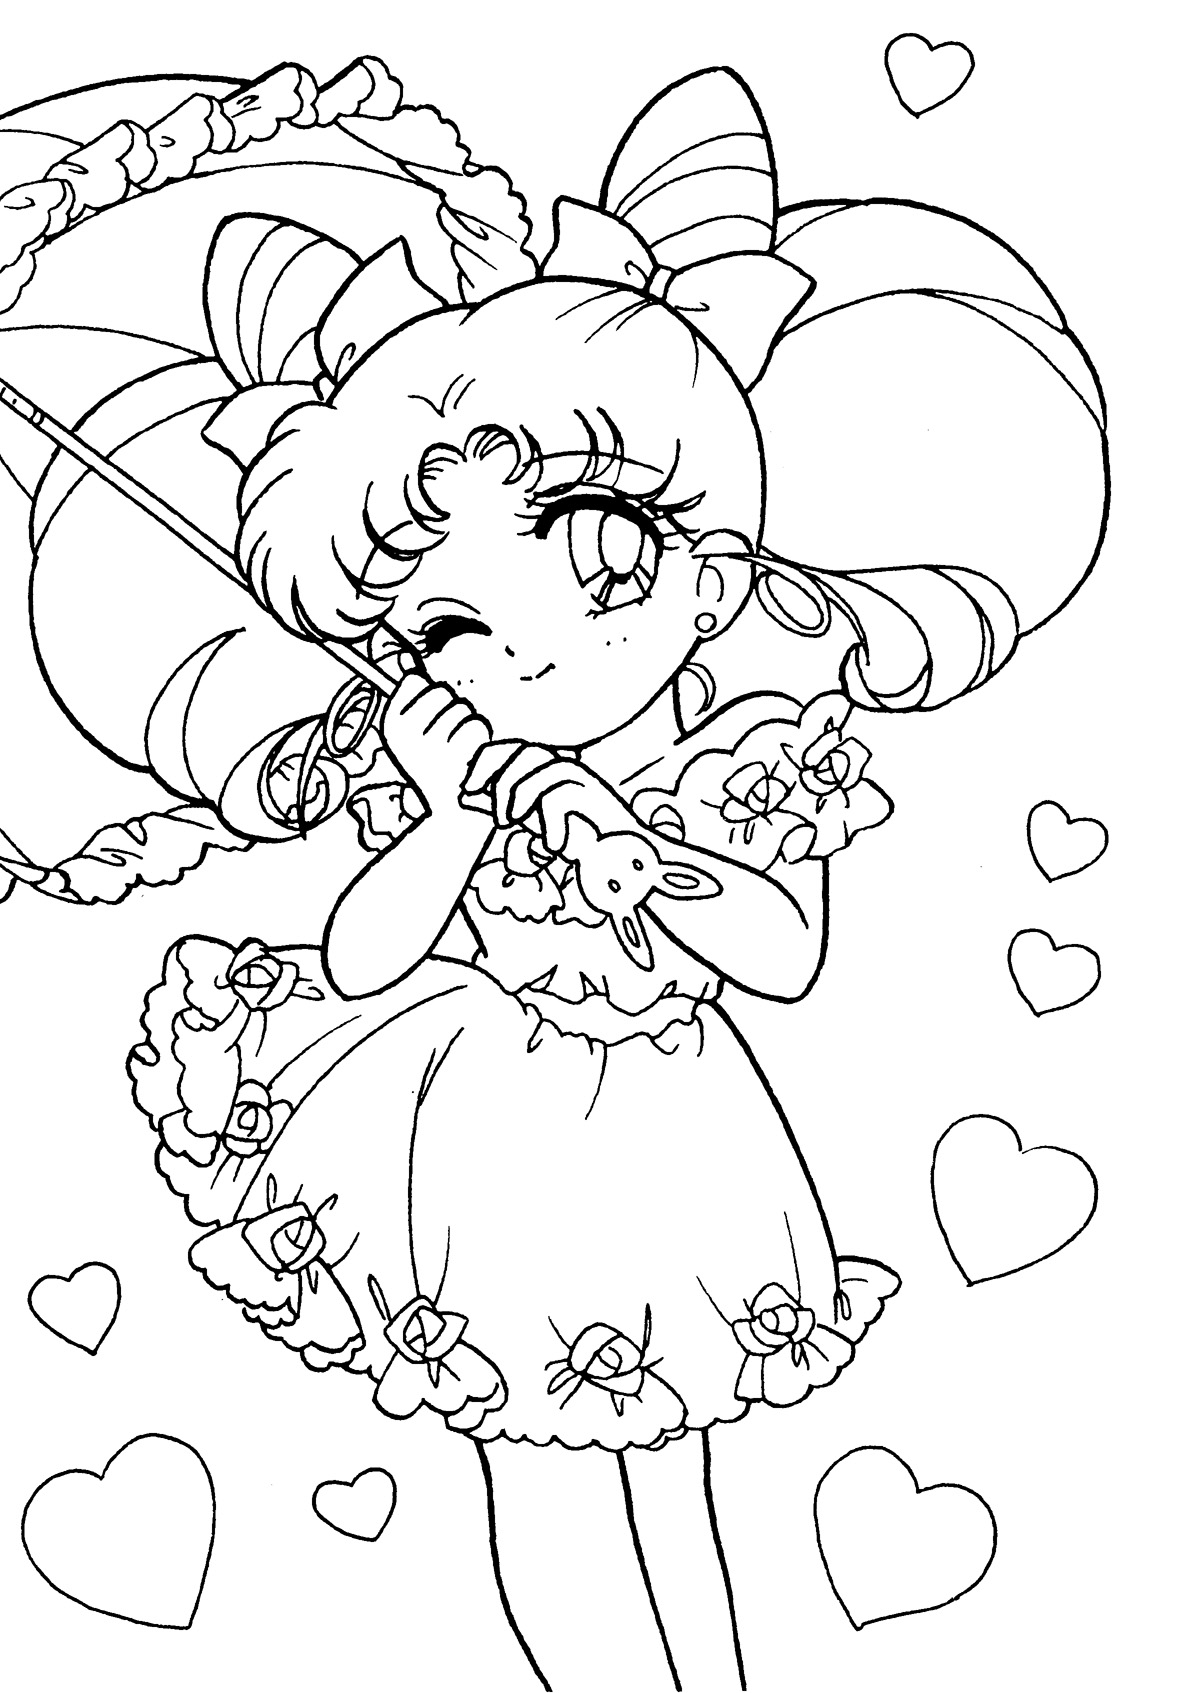 Sailor Moon Coloring Pages at GetDrawings | Free download